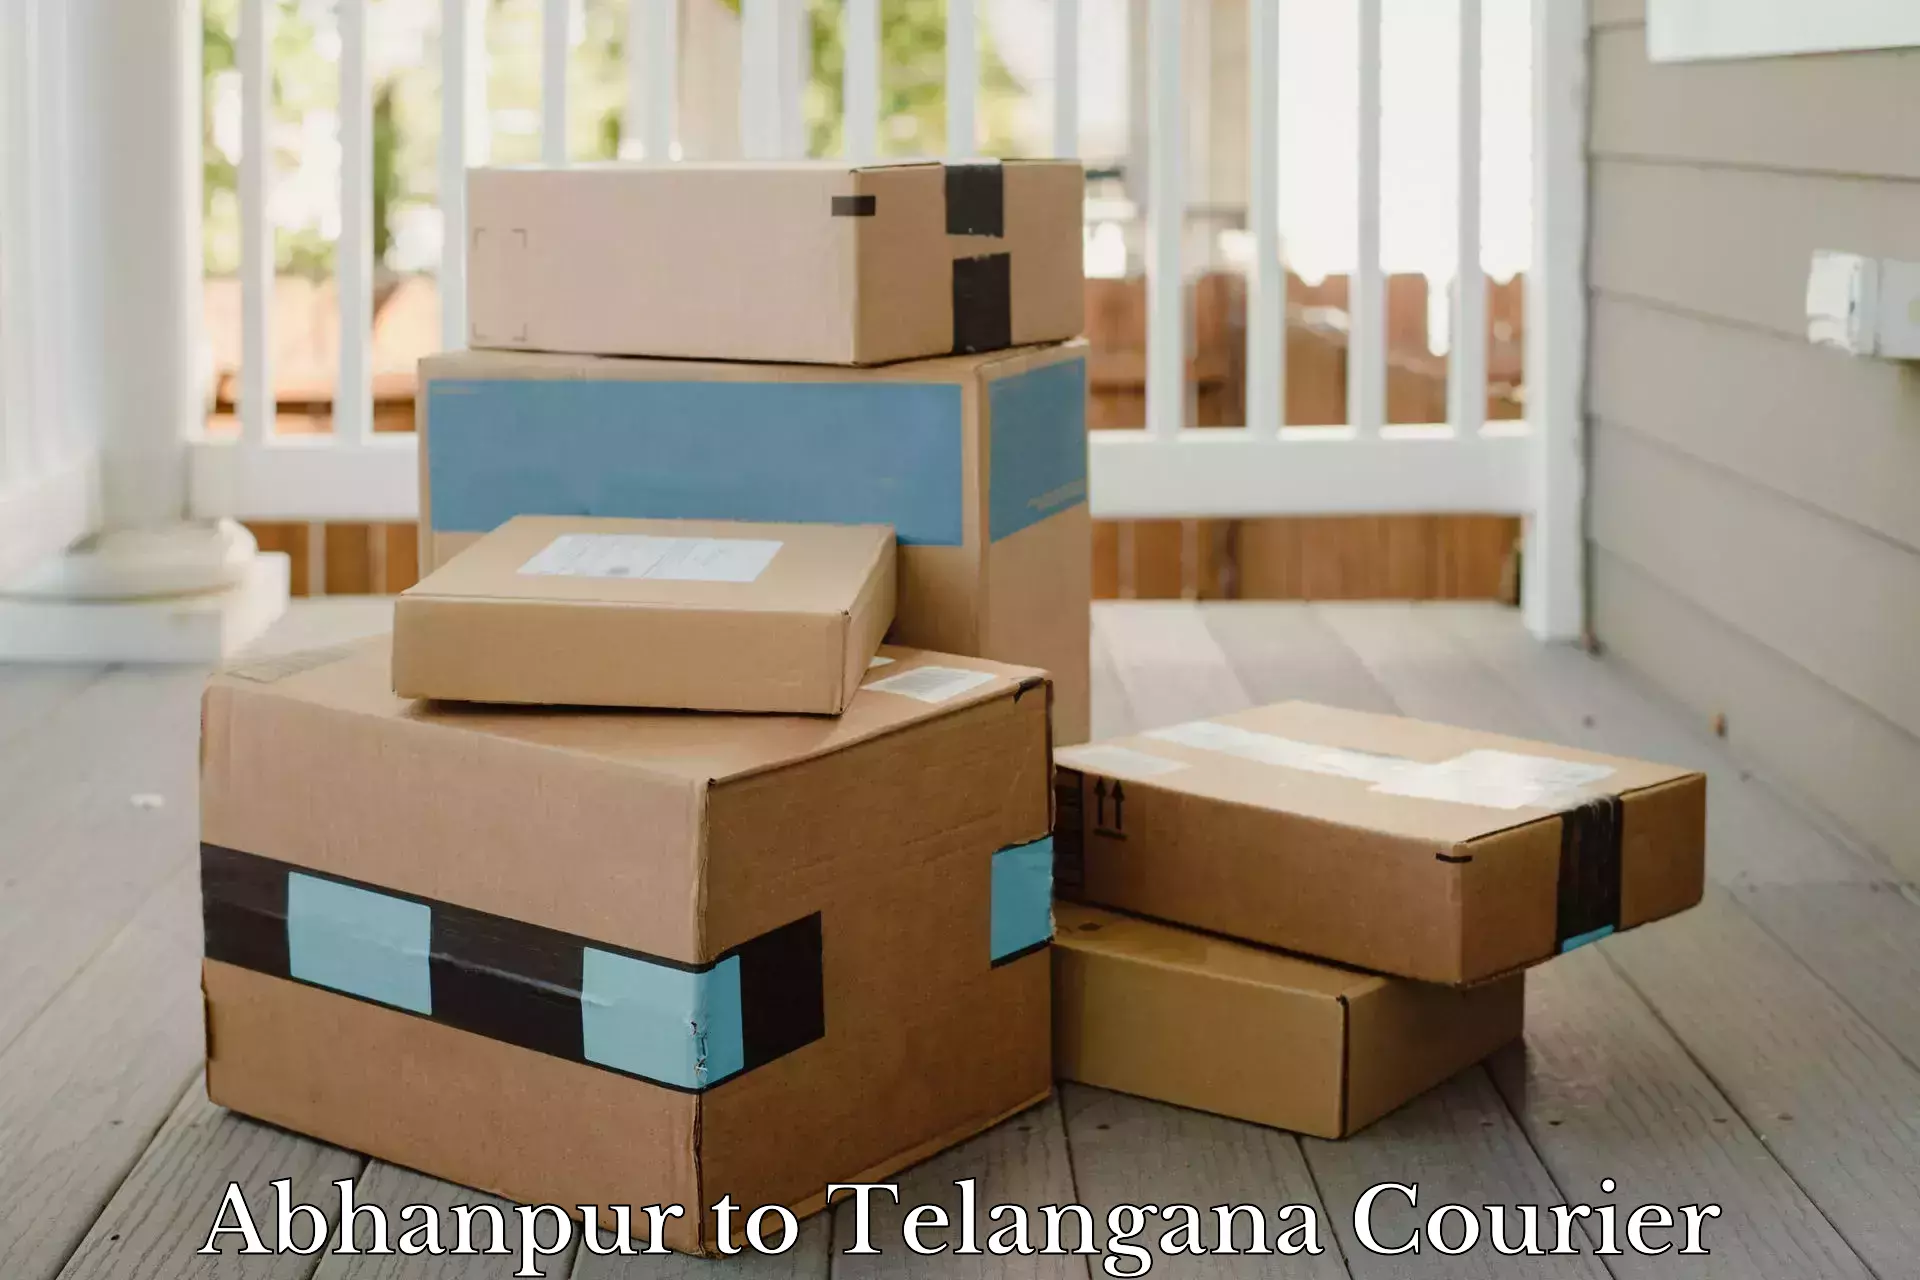 Nationwide courier service Abhanpur to Telangana